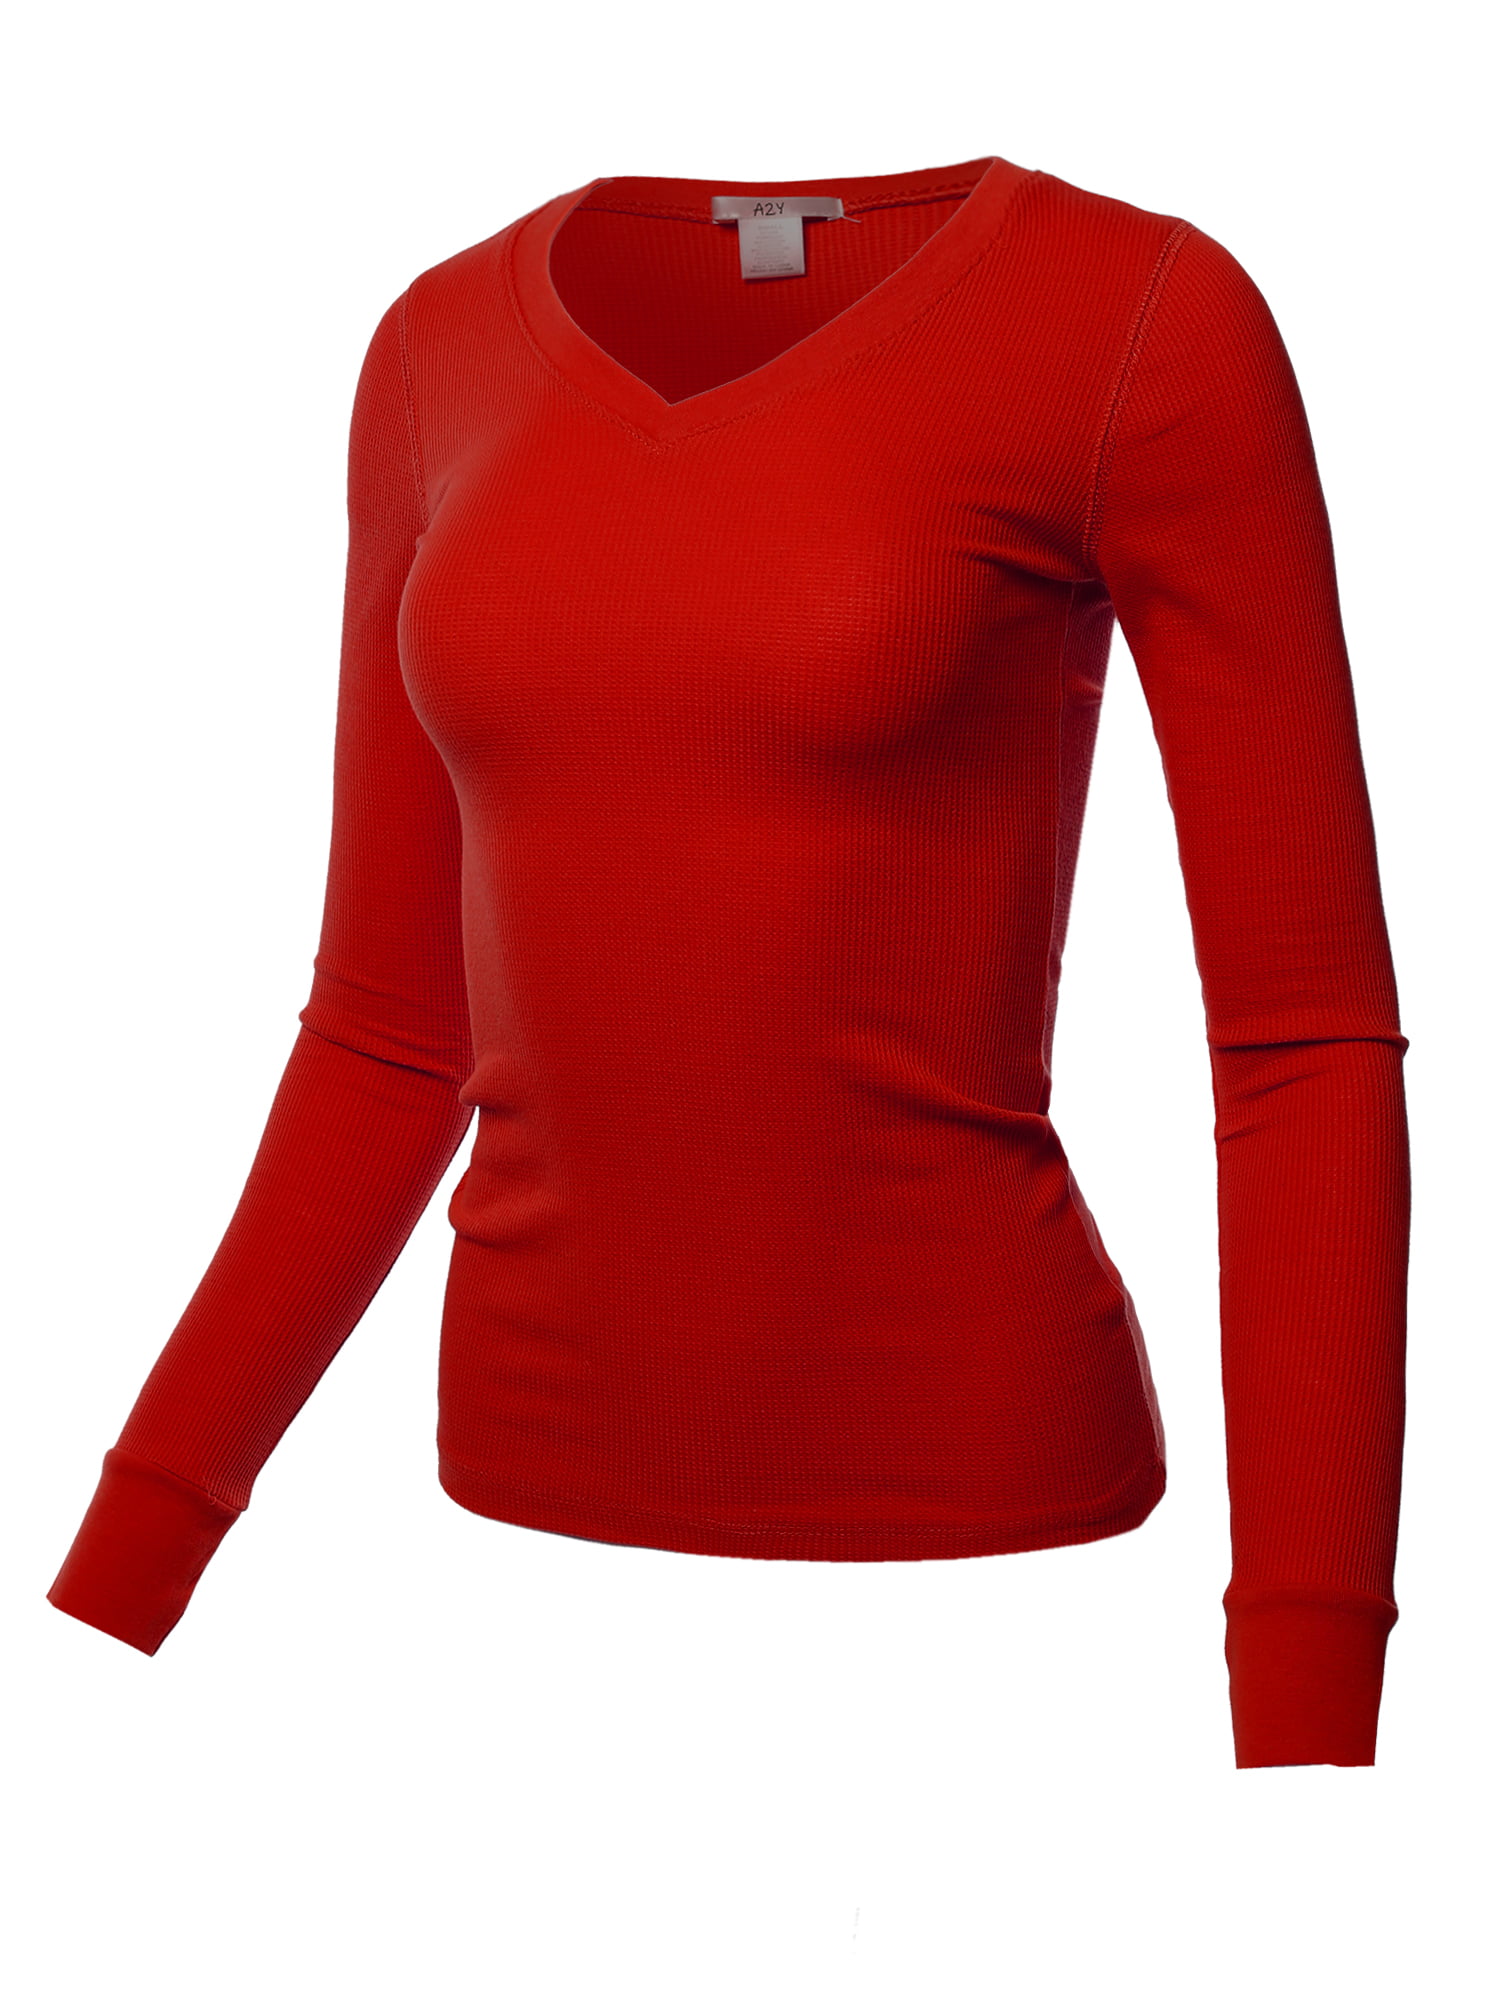 Long Fitted Red Shirt Sleeve V-Neck A2Y Scarlet Thermal Top Basic 3XL Women\'s Solid